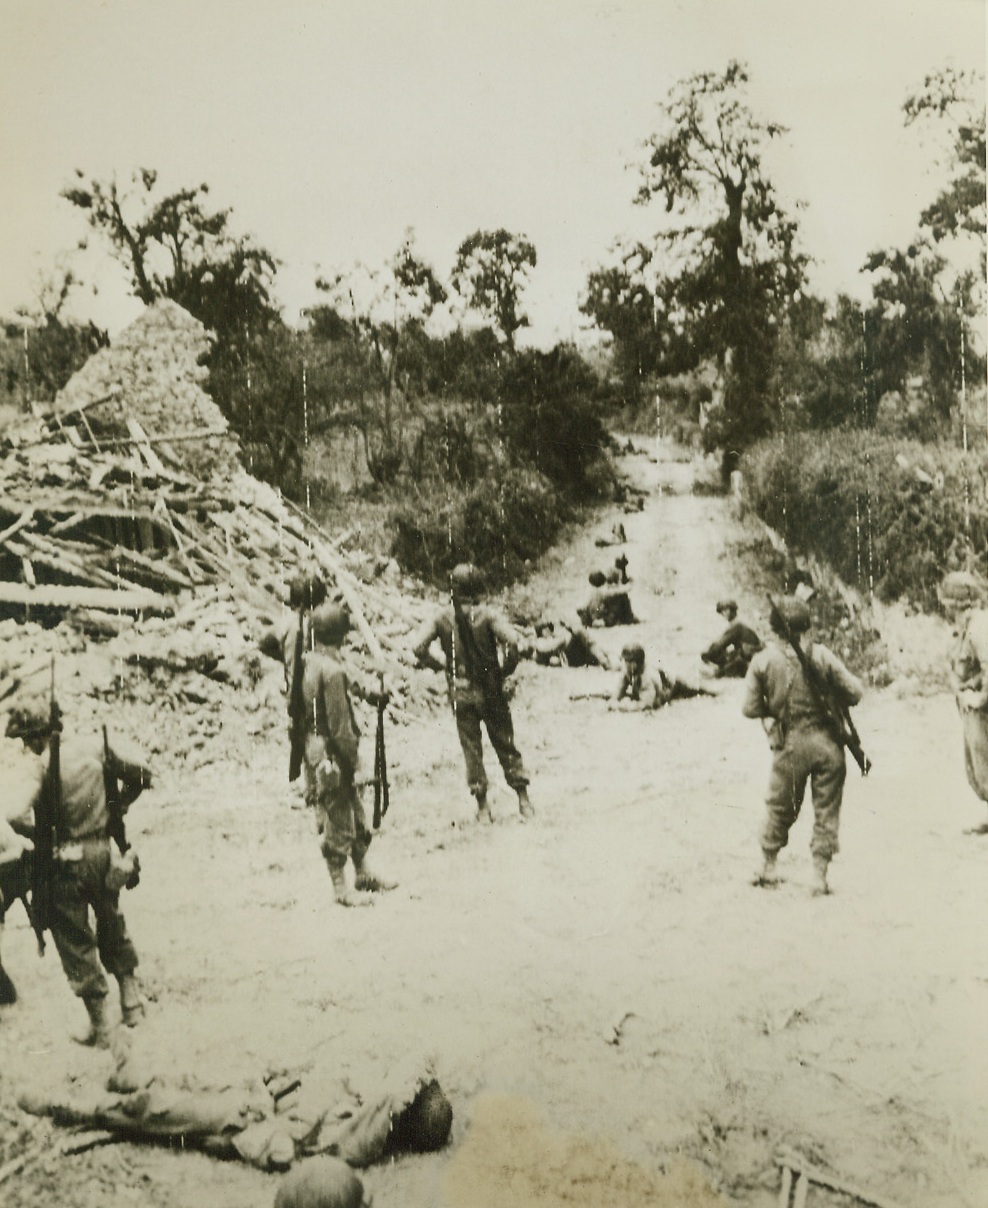 Yanks Stop for Chow, 7/20/1944. France – Beside a wrecked building north of St. Lo, relentlessly advancing American infantry men pause for chow before pushing on to their next objective. Soldiers line the road leading past the ruined house, sitting, reclining, and some catching forty winks. Credit: Signal Corps Radiotelephoto from ACME;